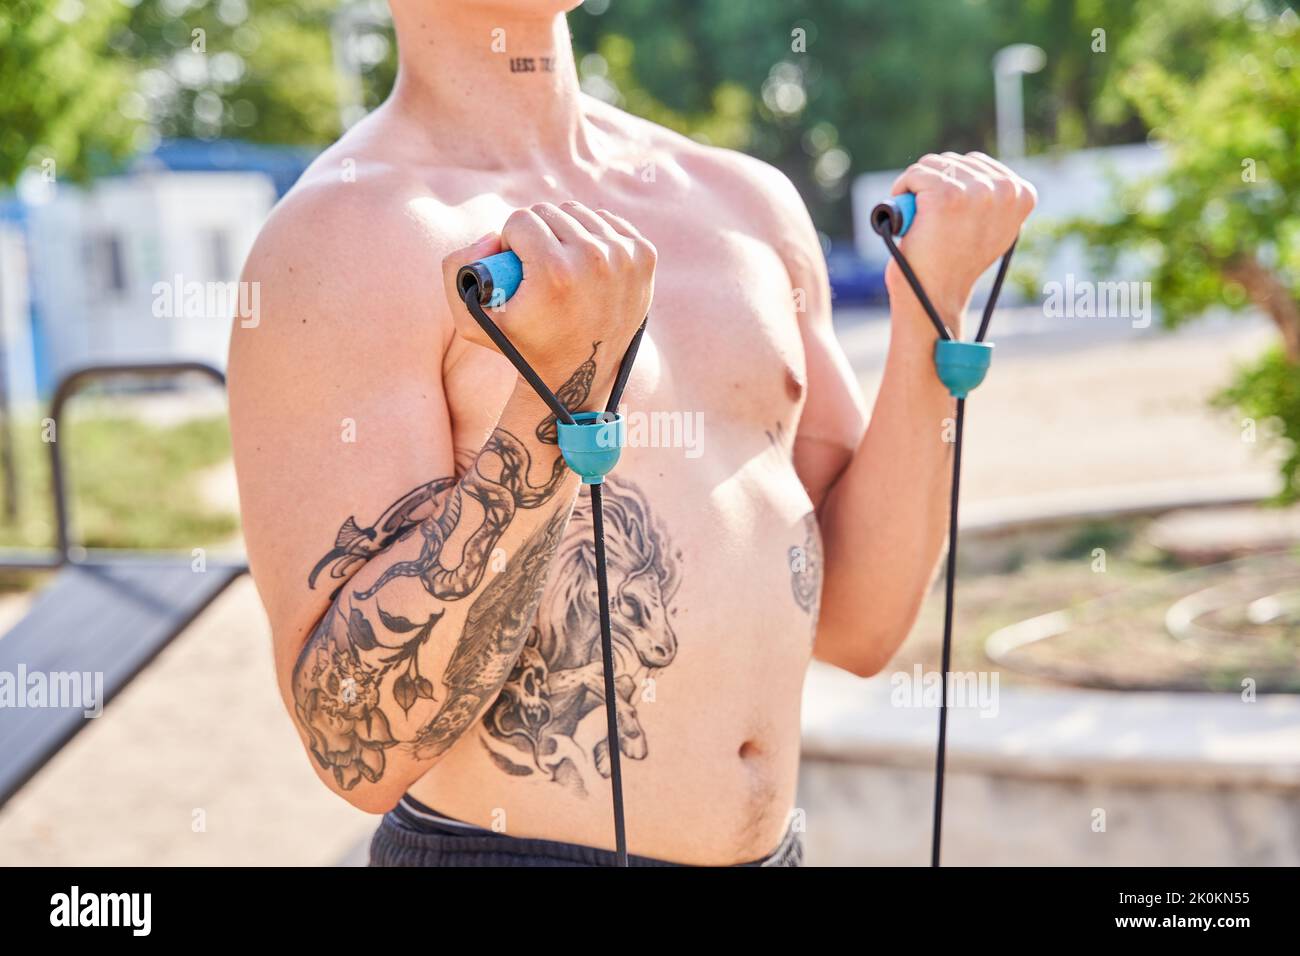 unrecognizable man training with rubber bands outdoors Stock Photo